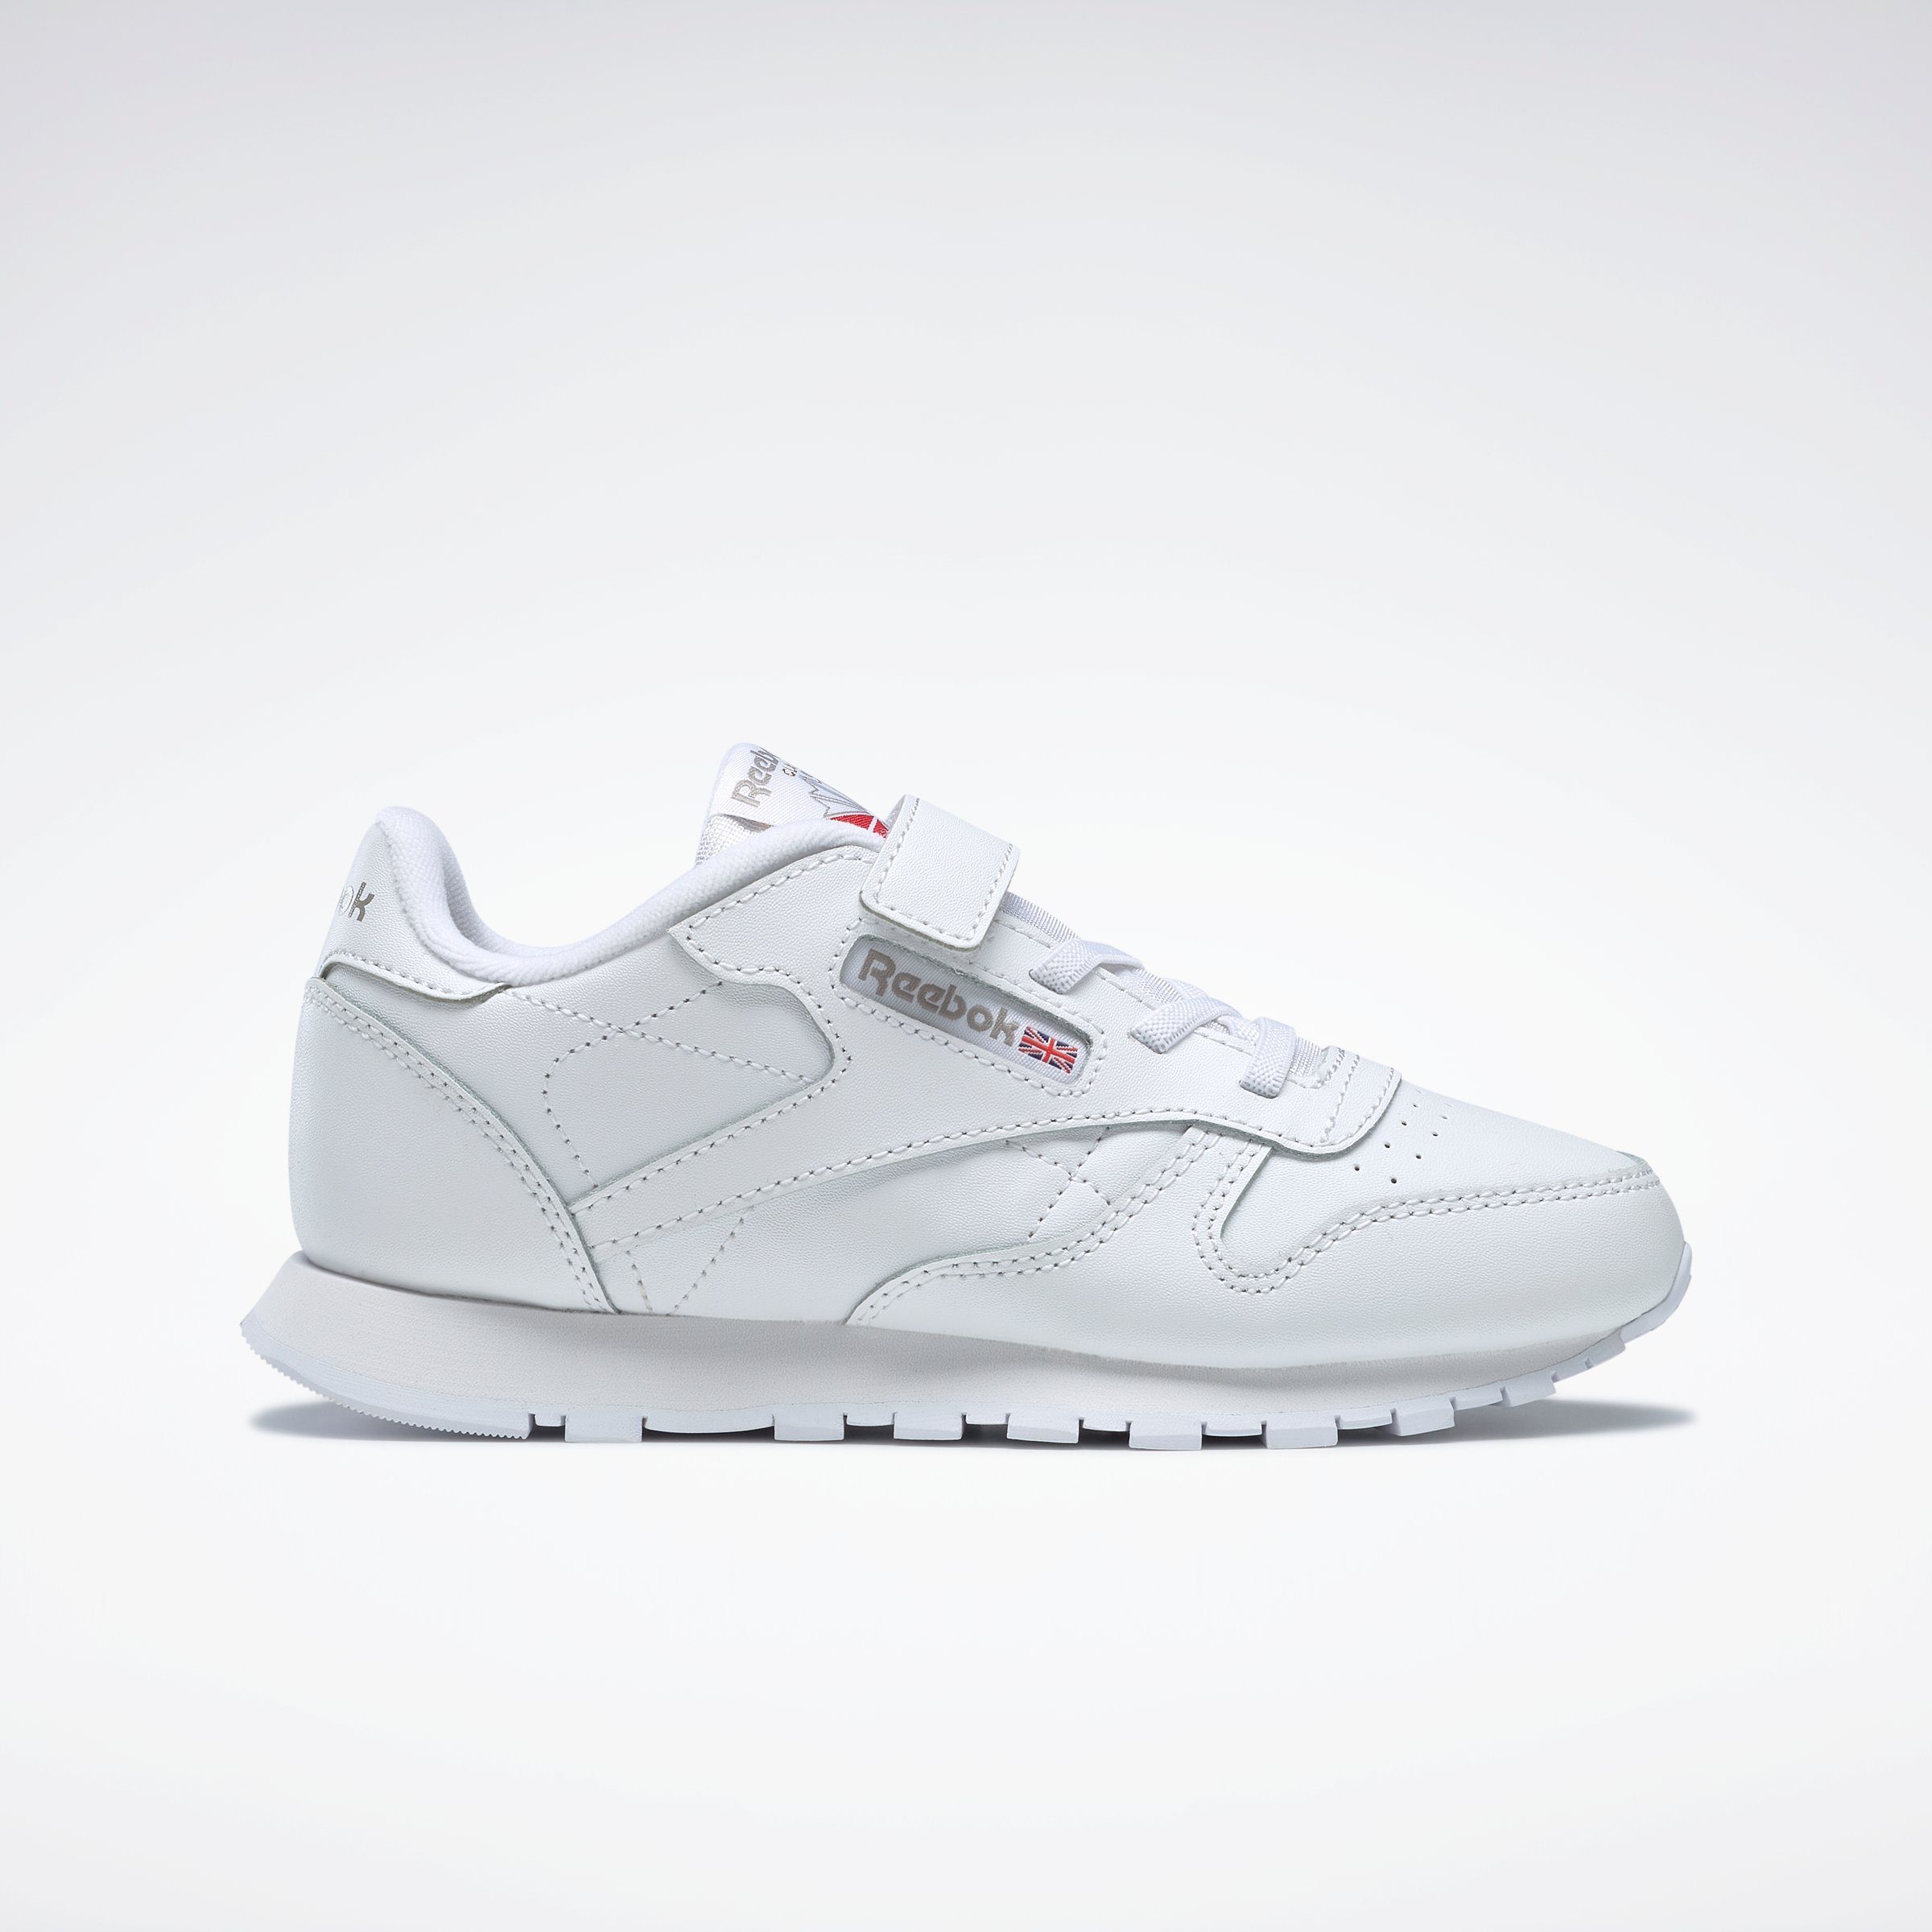 Classic Reebok SHOES CLASSIC LEATHER Sneaker